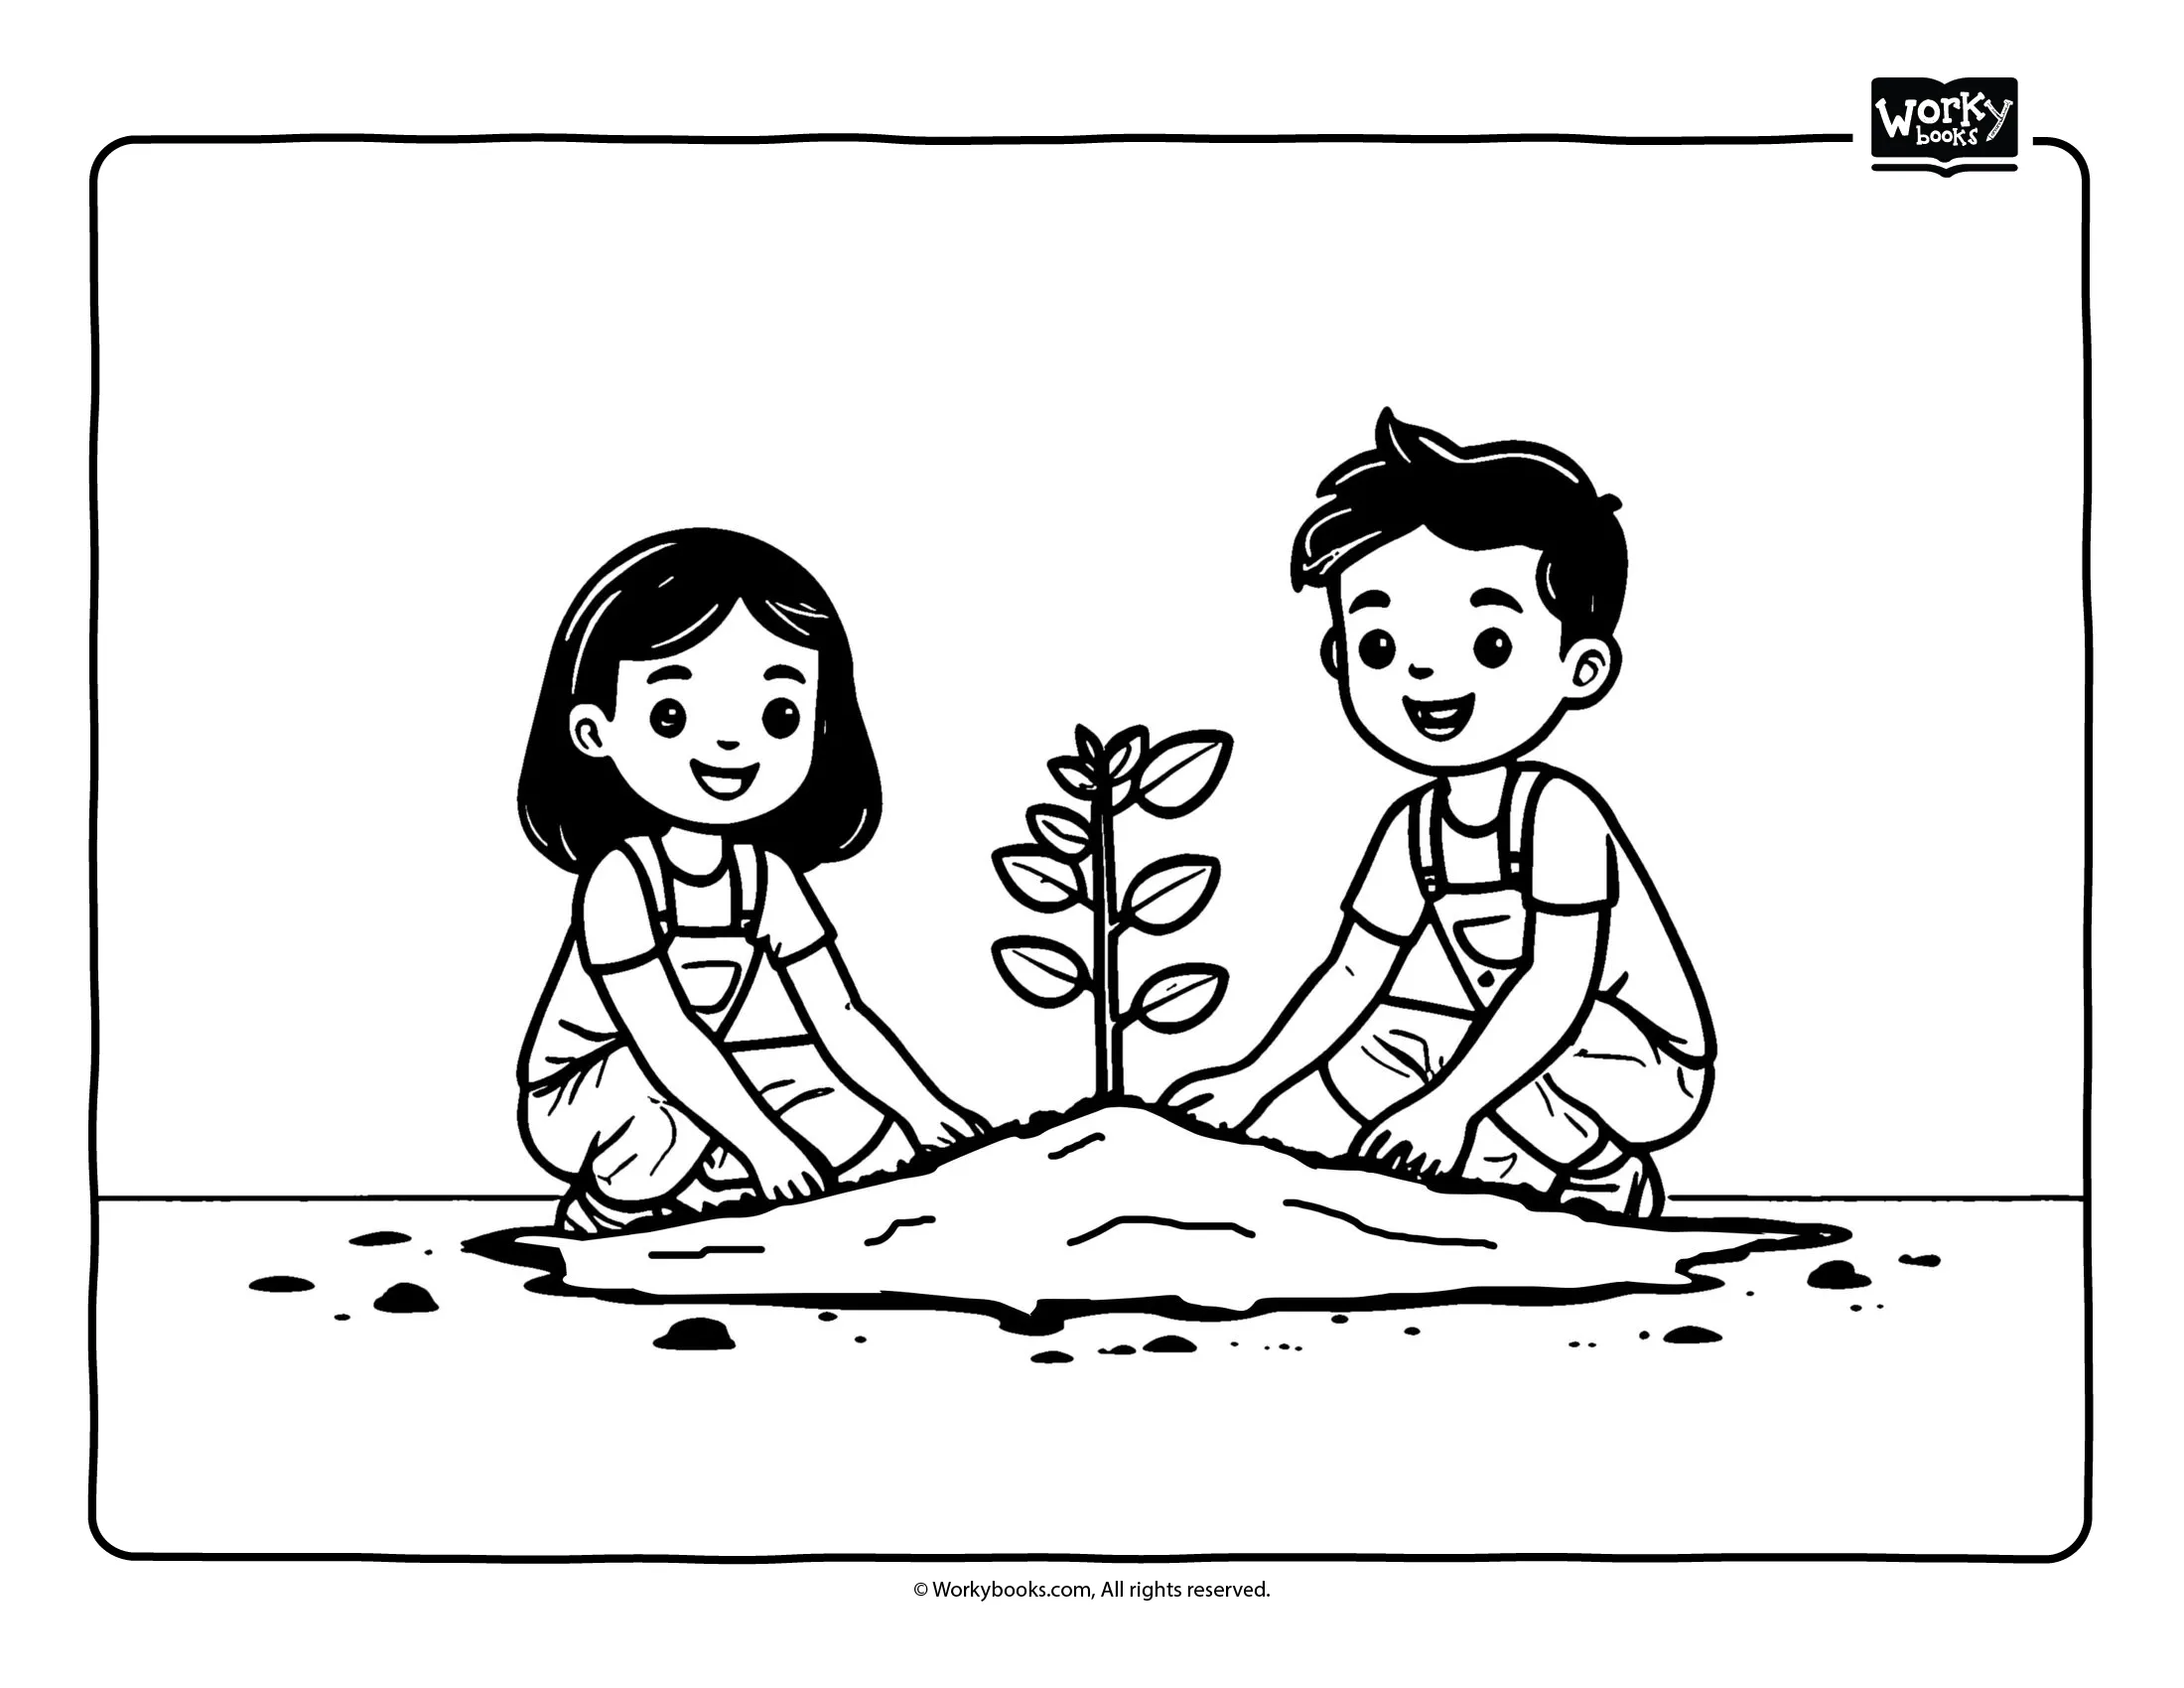 Planting a tree coloring page